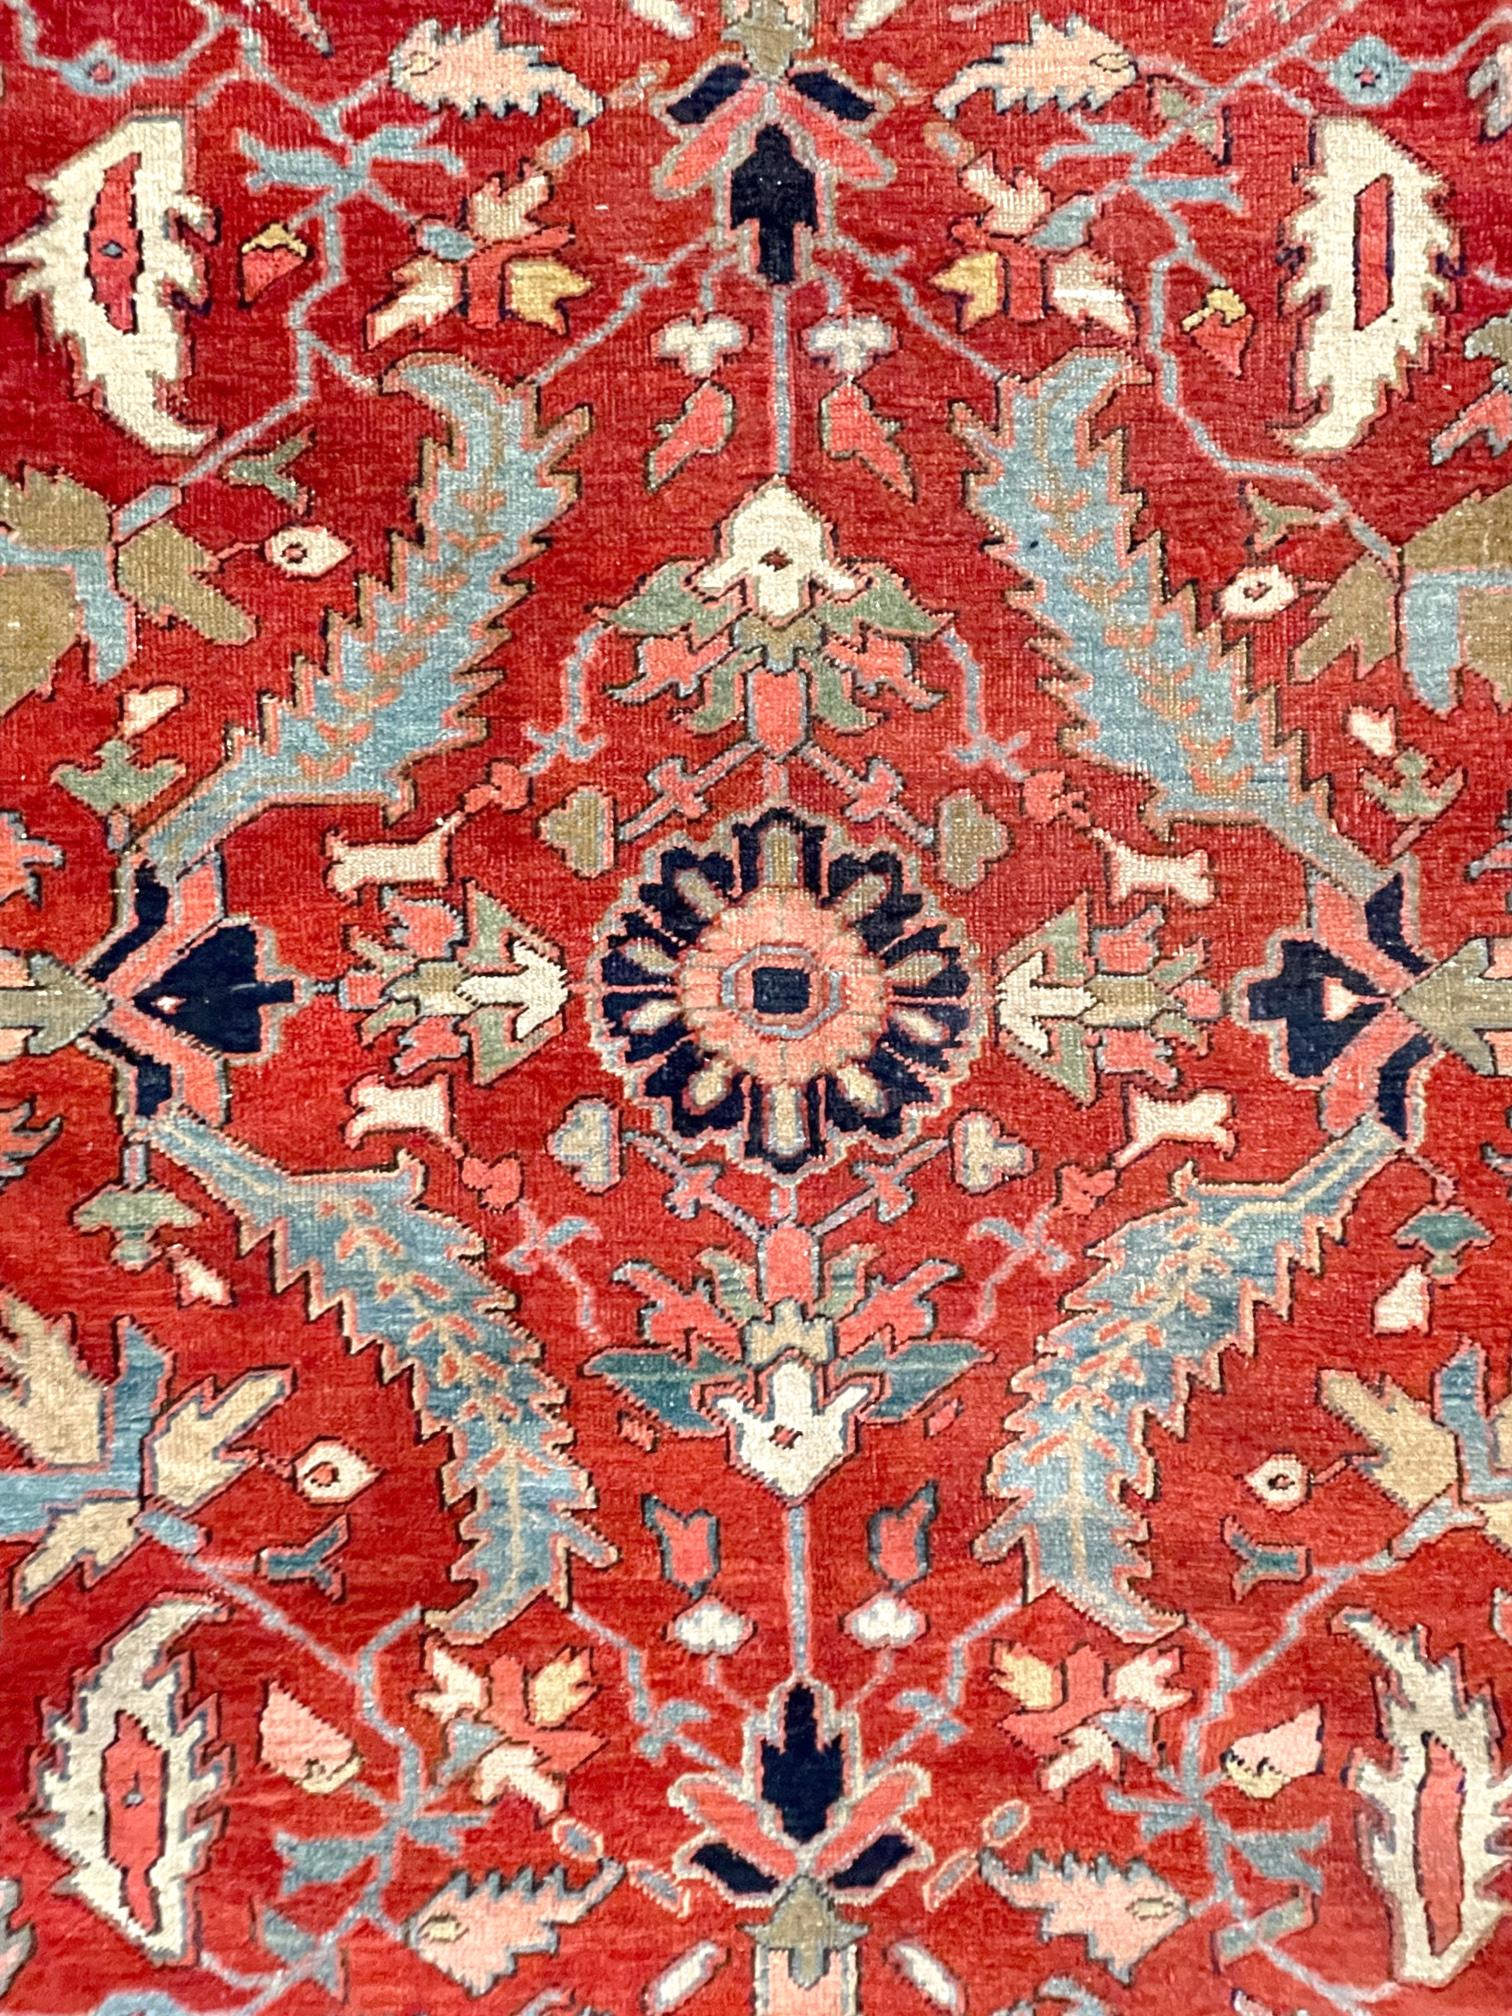 This Persian Tabriz-Heriz rug, Heriz rugs are Persian rugs from the area of Heriz, East Azerbaijan in northwest Iran, northeast of Tabriz. This rug has wool pile and cotton foundation, hand knotted with an excellent condition for its age. This rug